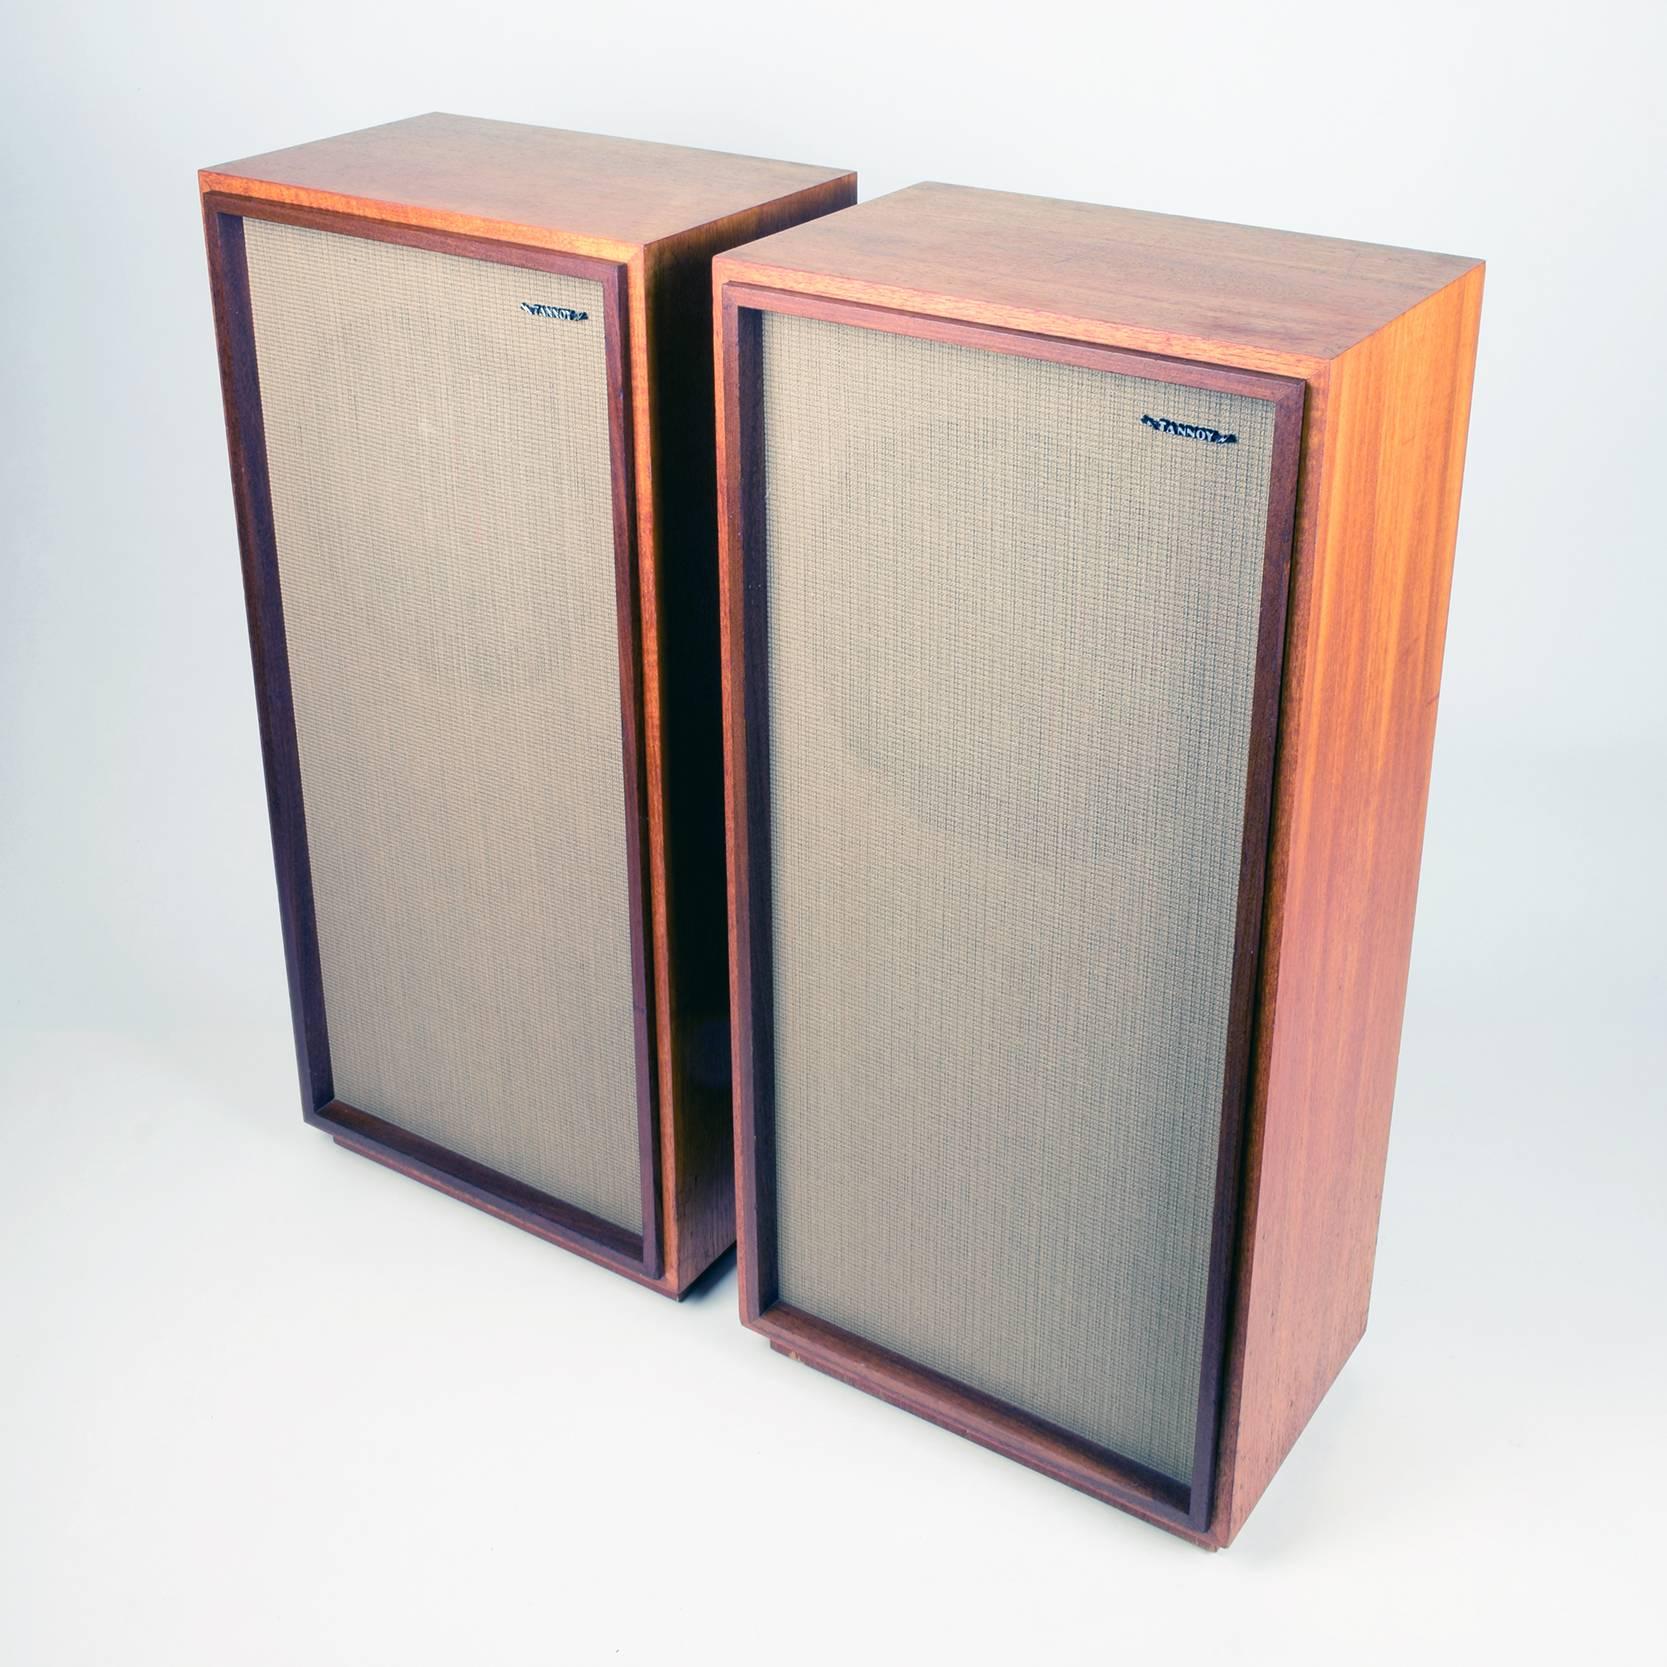 Tannoy monitor gold 12 inch speakers LSU/HF/12/8 in original 'Chatsworth' cabinets.

A true British classic, these are the legendary Tannoy Monitor Gold loudspeakers.

The Monitor Gold was manufactured by Tannoy from approximately 1967 to 1974, for